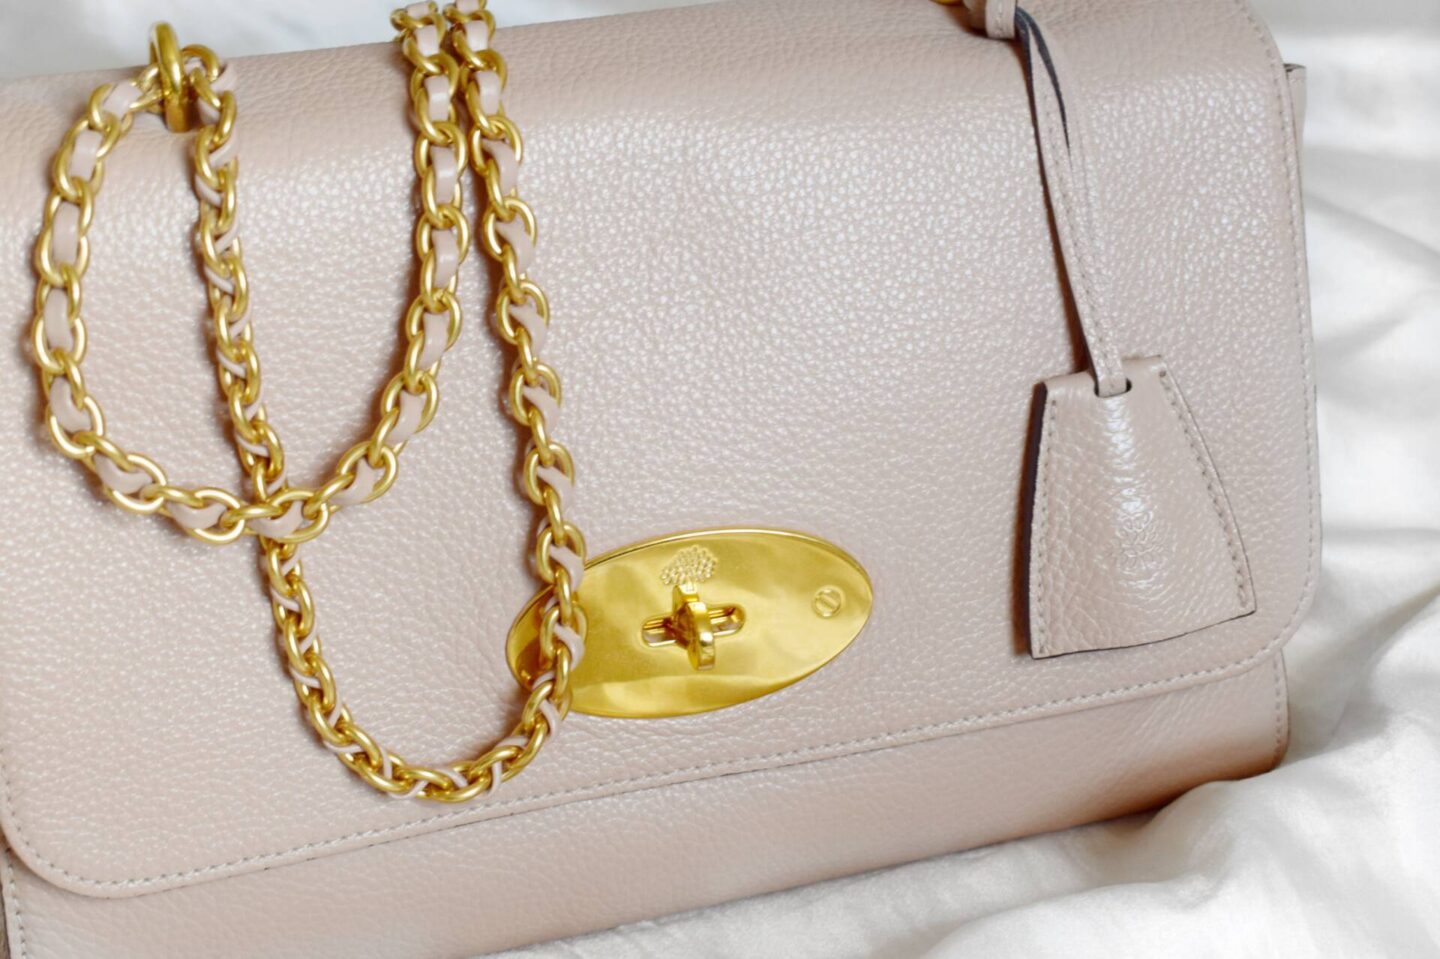 Mulberry Lily: Identical bag in two colours - Happy High Life